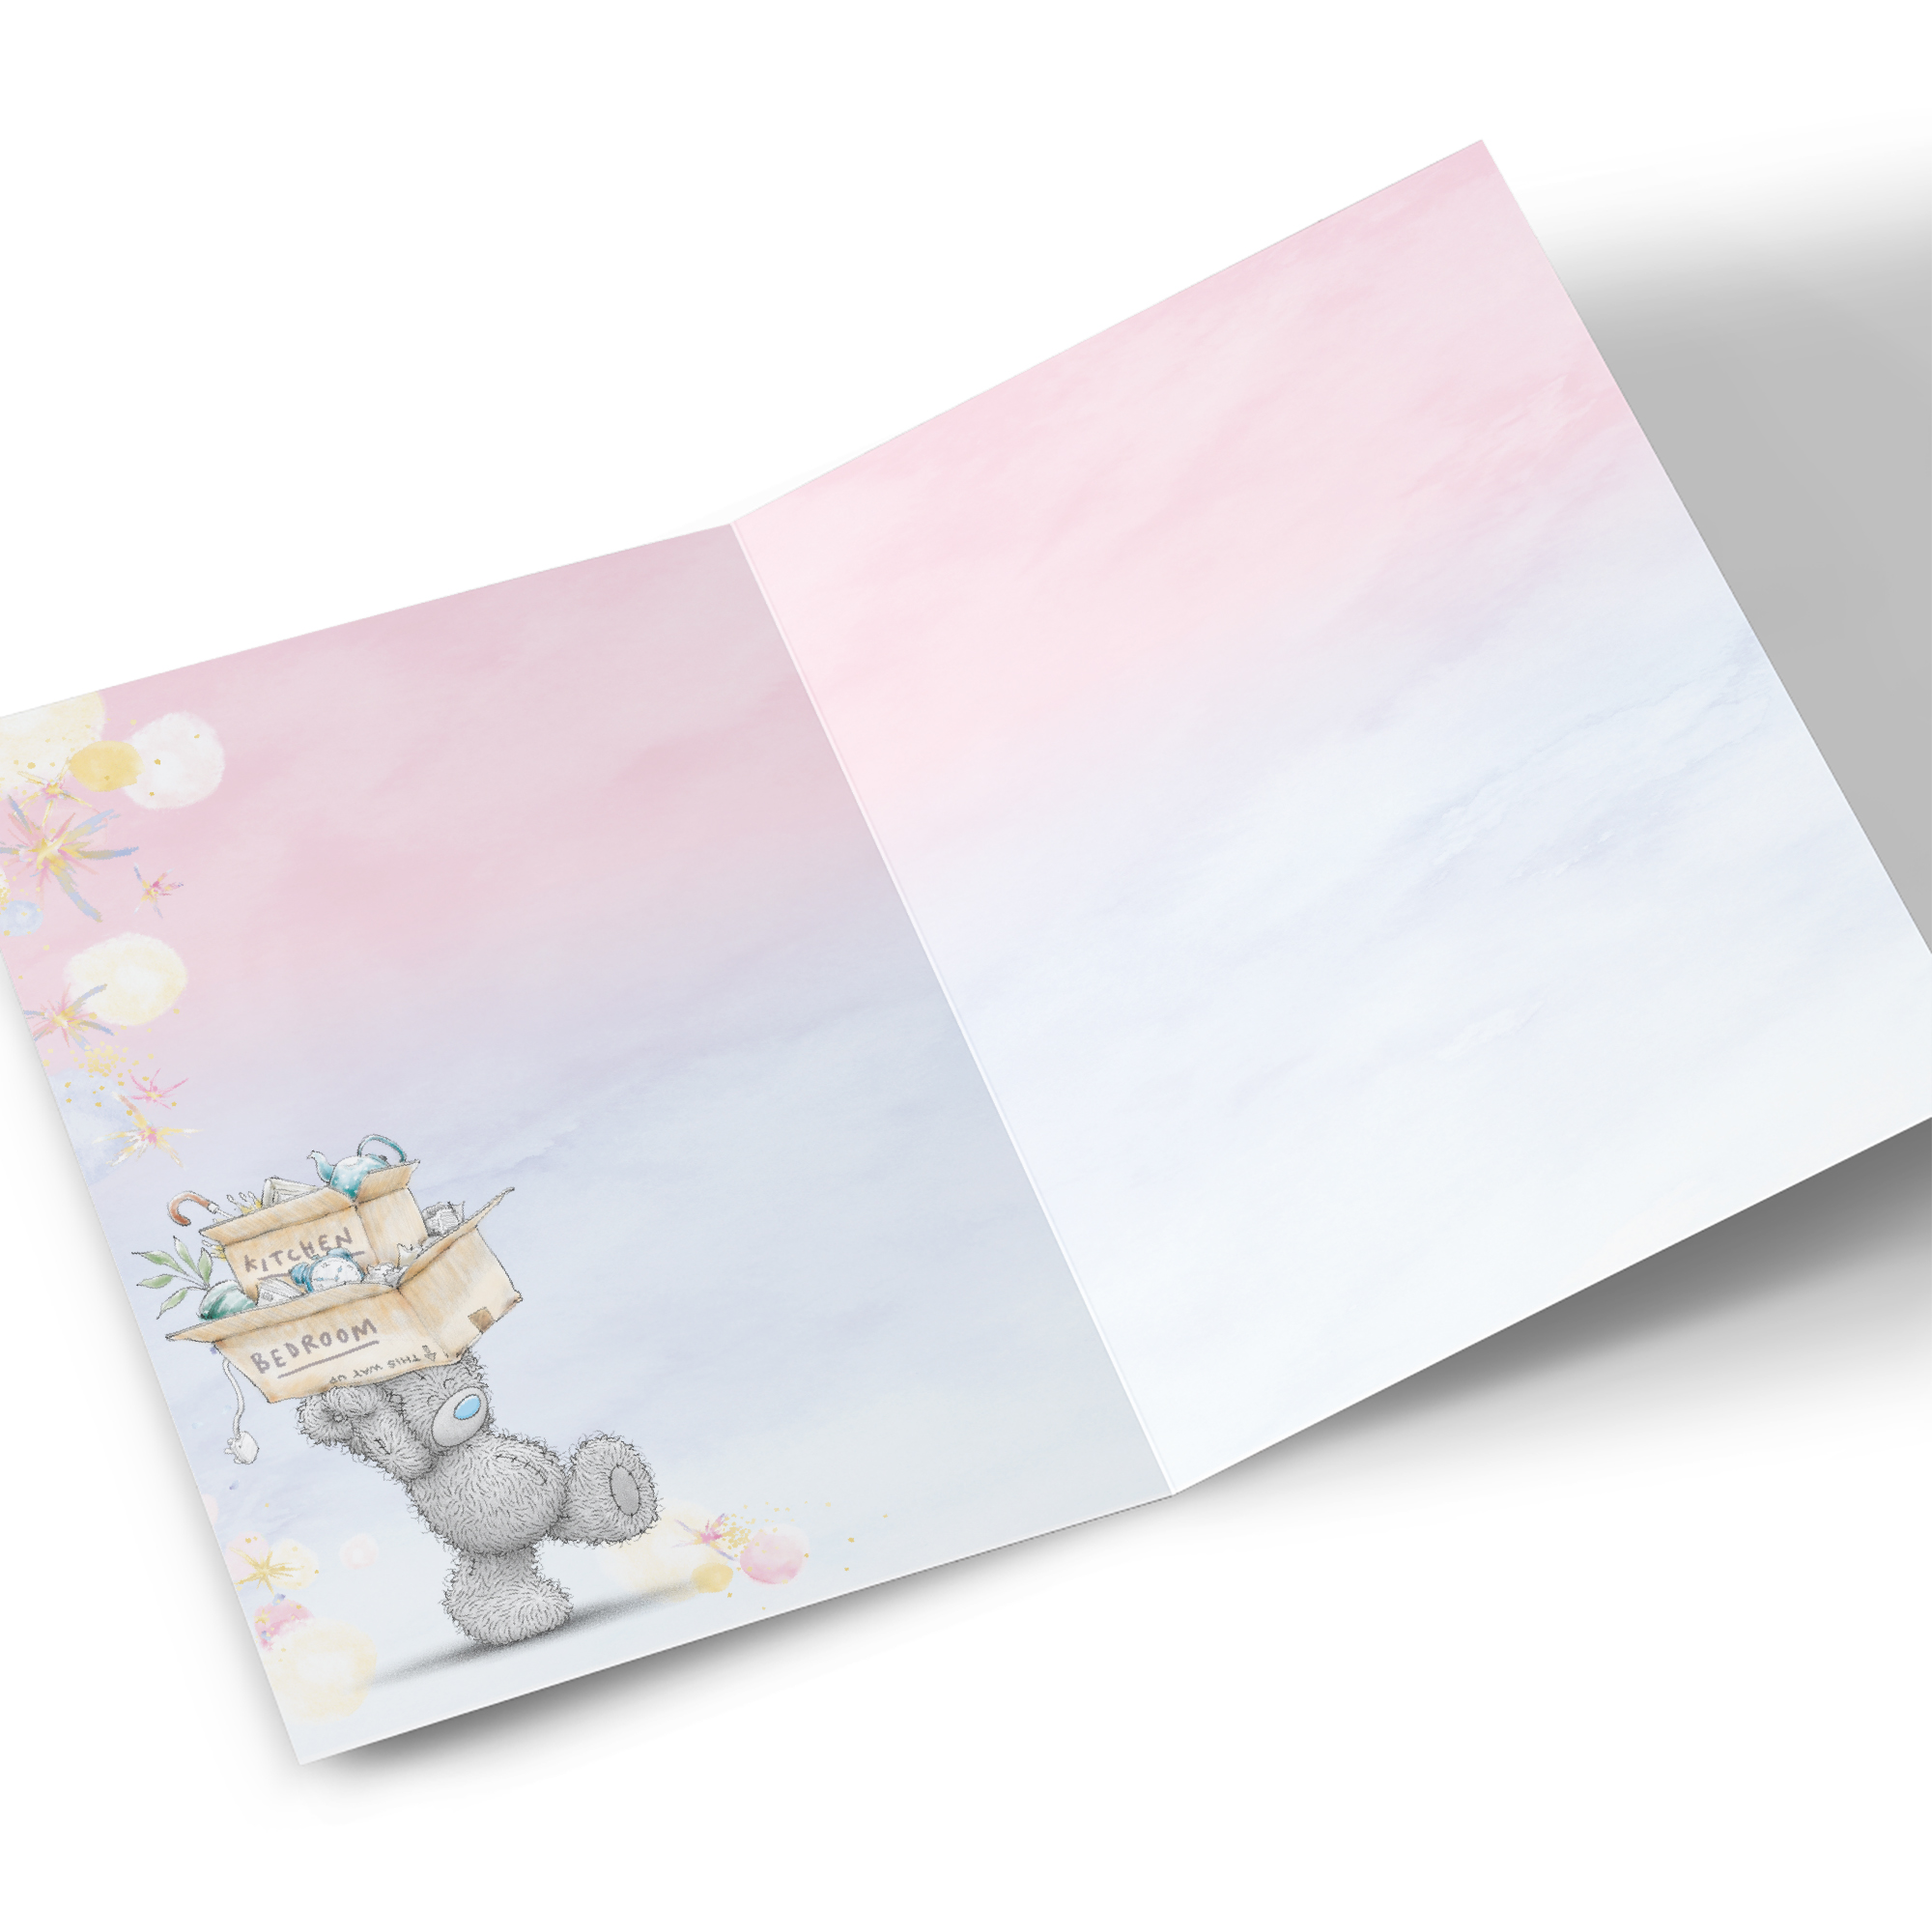 Personalised Tatty Teddy New Home Card - Enjoy Your New Home